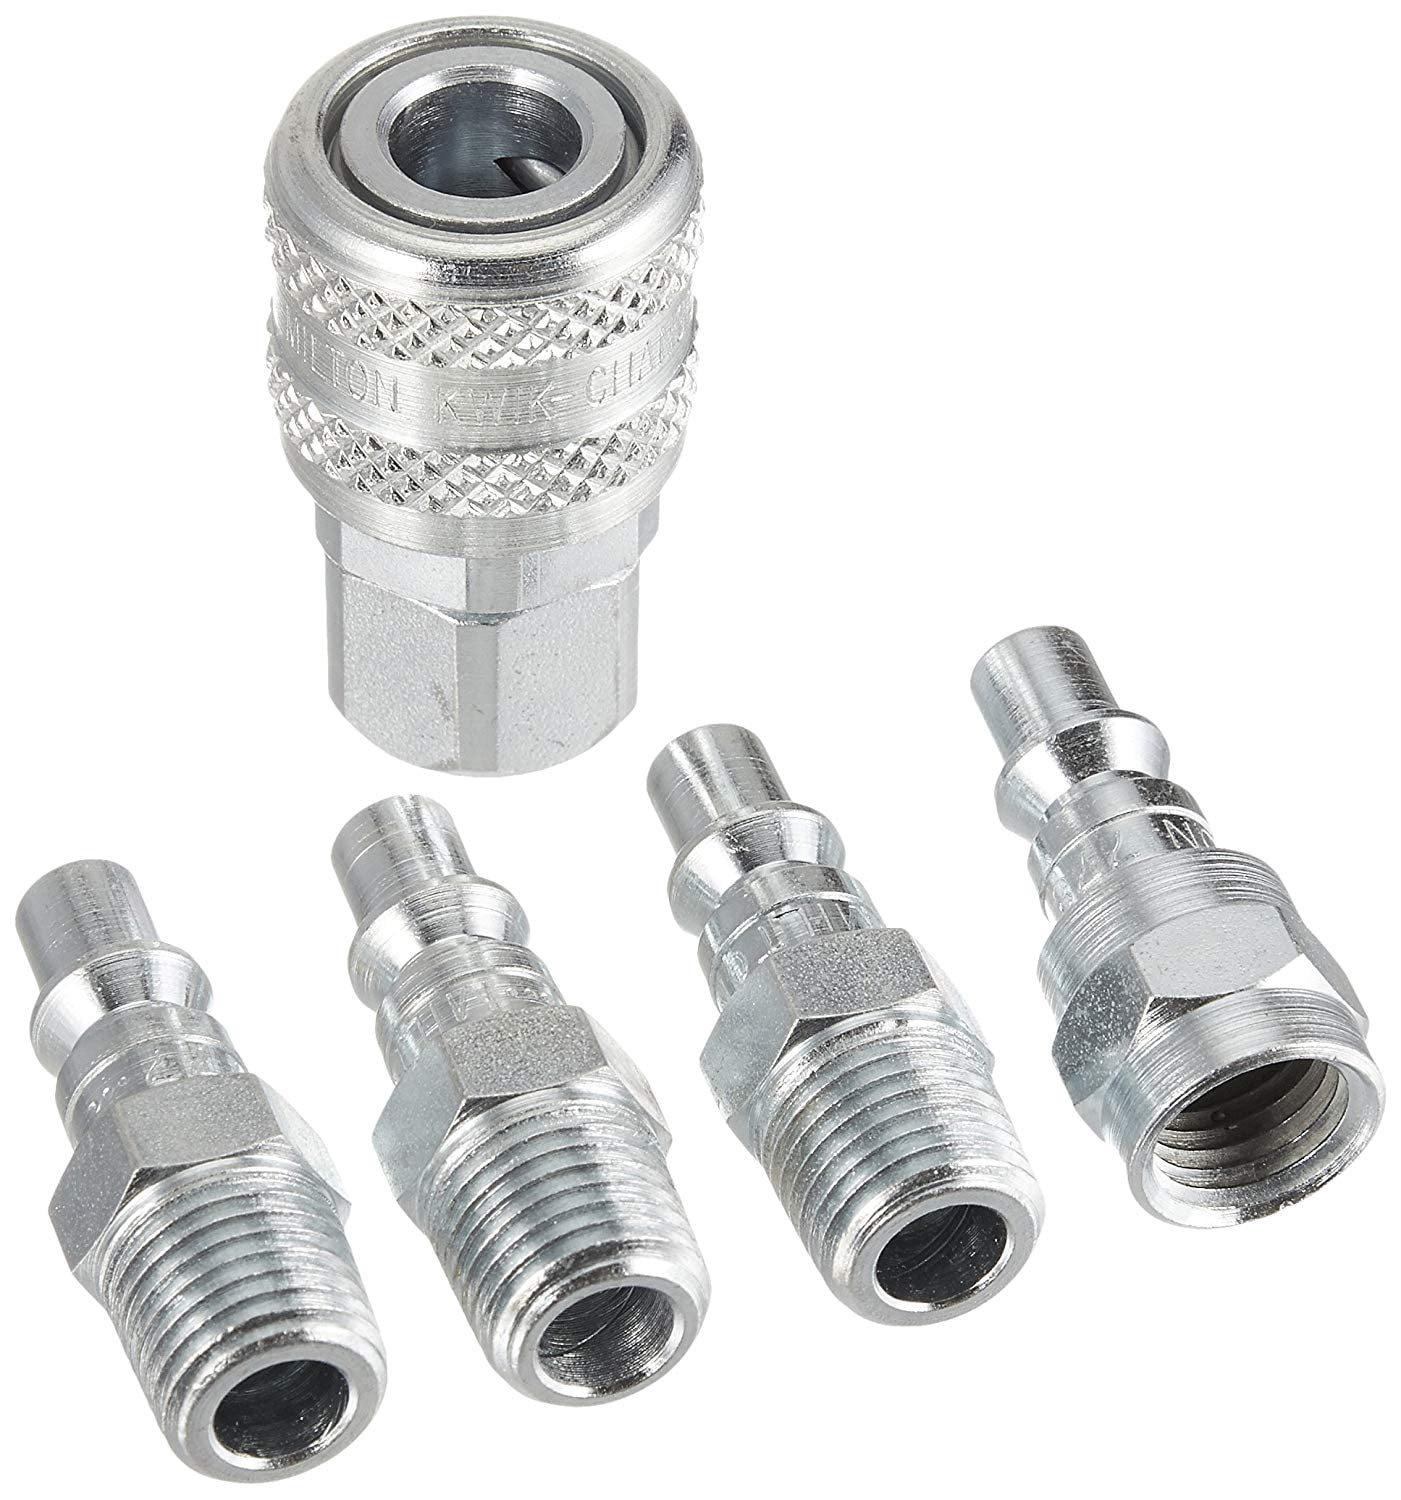 10 Pieces Milton 777 A-Style Air Hose Fittings 1/4" Male NPT Coupler Plugs 